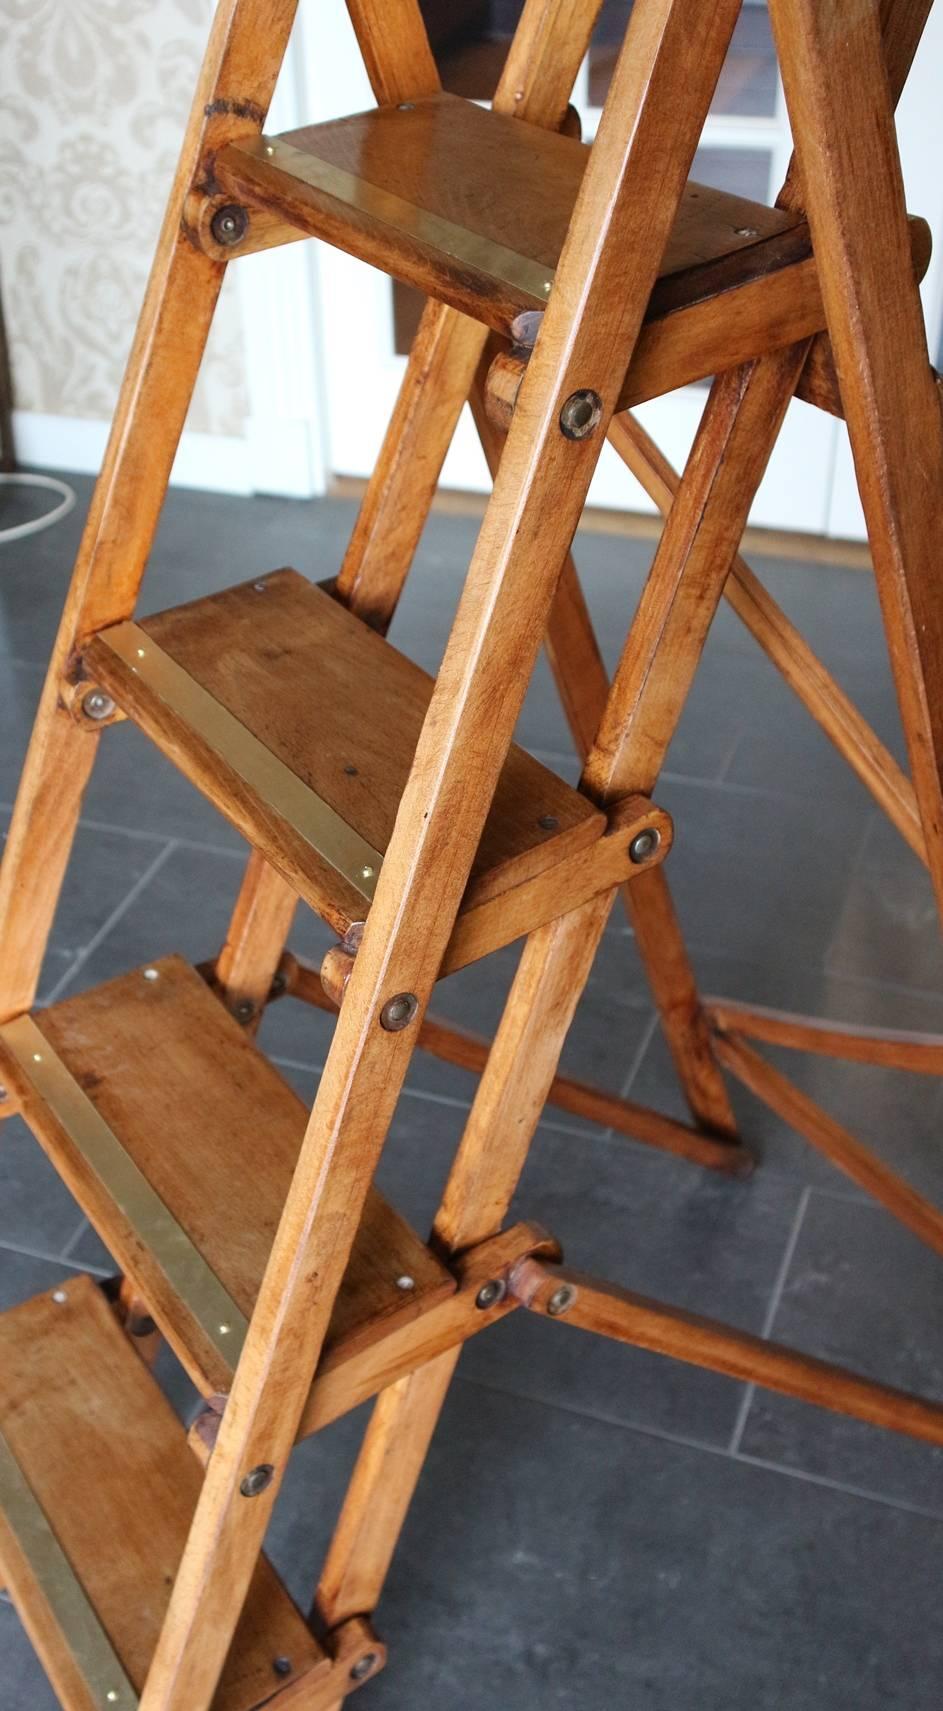 Beautiful and solid wooden step ladder. In perfect state. Beechwood. Brass strips are newly applied for more grip.
Origin: England
Period: circa 1900-1920
Size: Height 124cm, W 39cm.